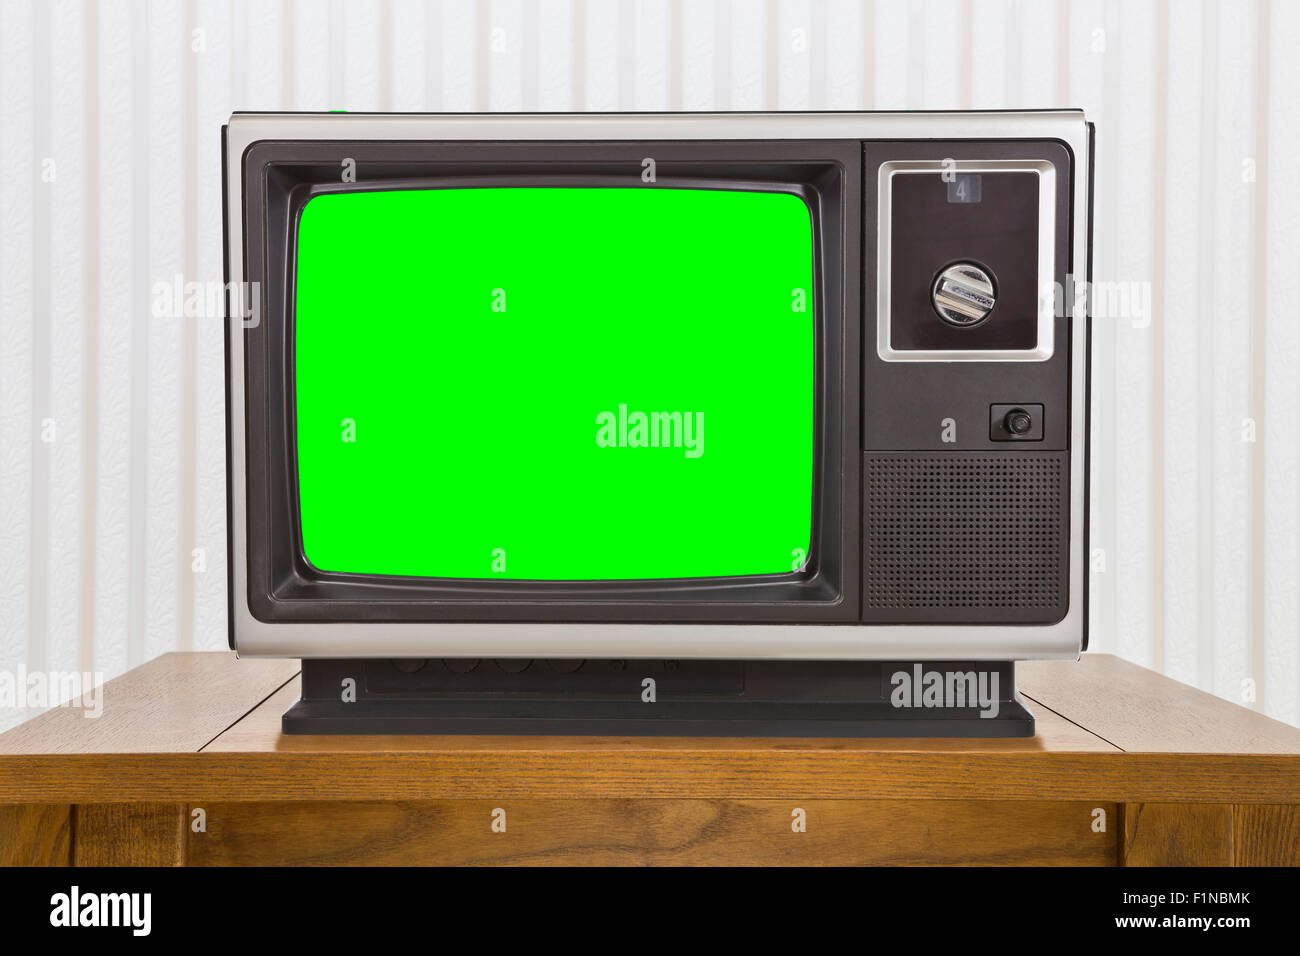 Old analogue portable television on table with green screen. Stock Photo